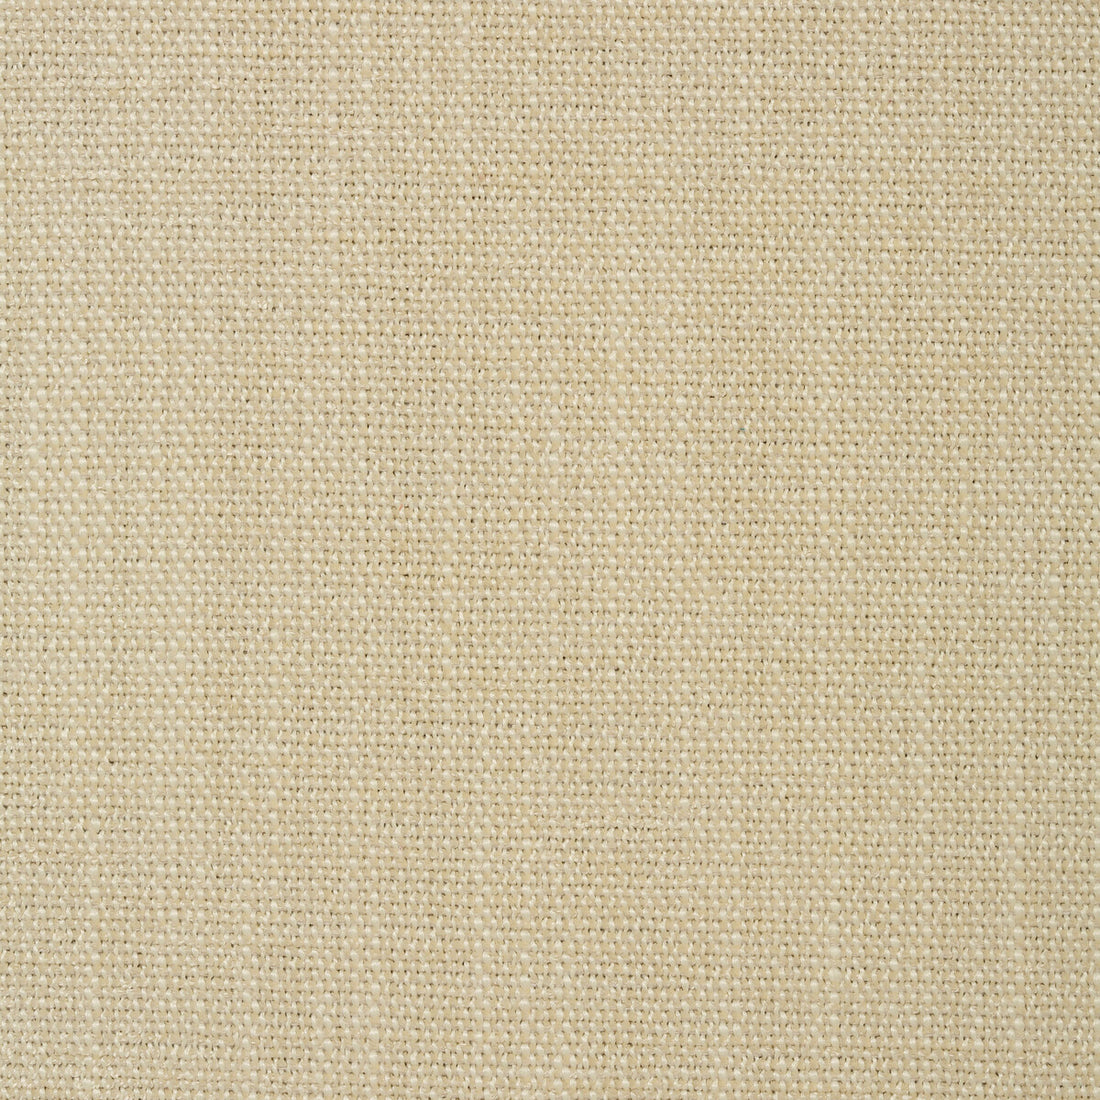 Kravet Contract fabric in 35114-116 color - pattern 35114.116.0 - by Kravet Contract in the Crypton Incase collection